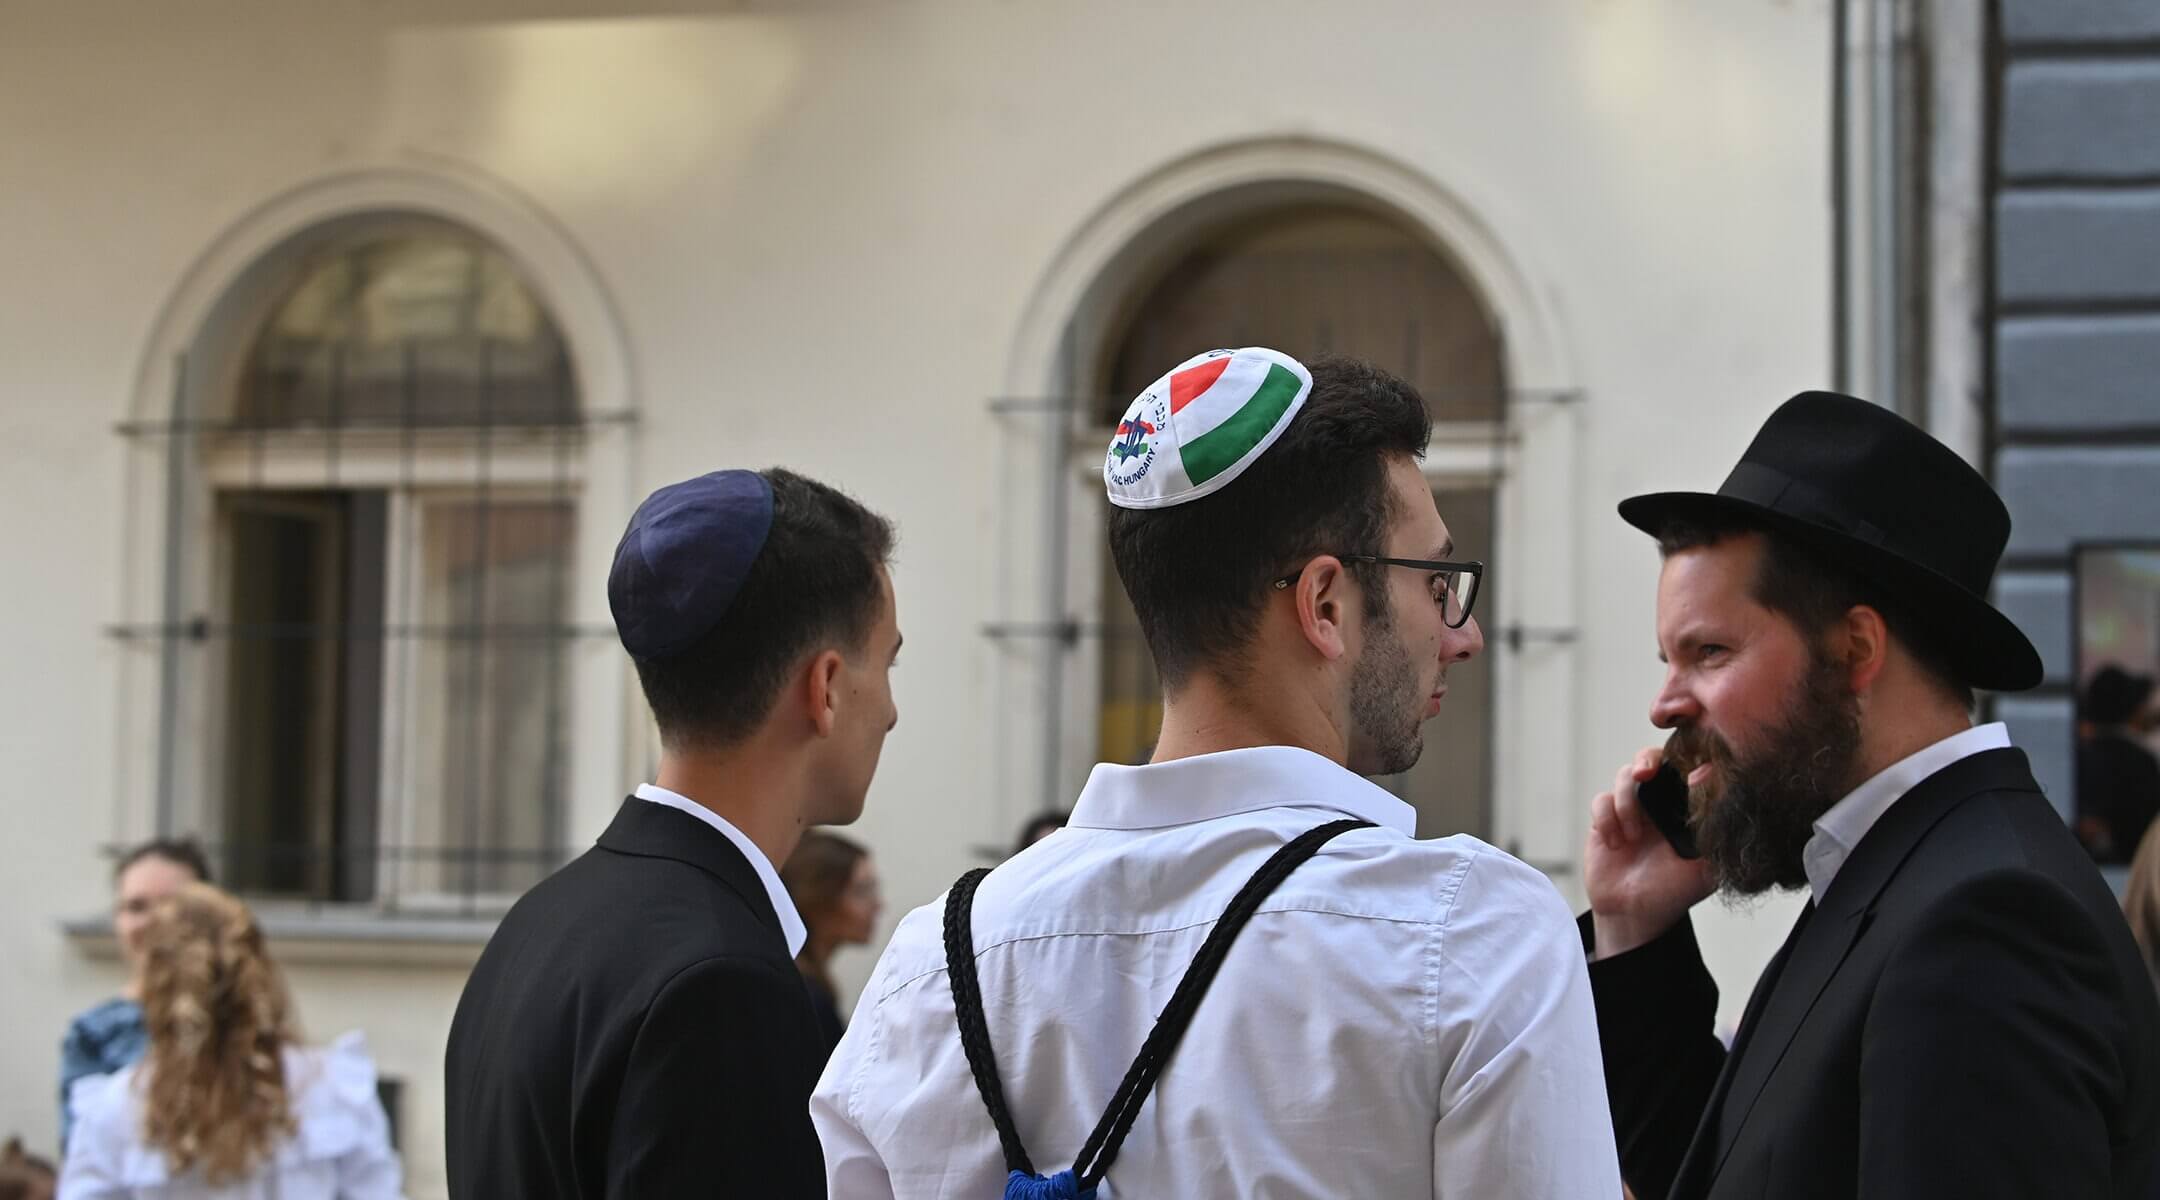 Hungarian Jews celebrate the opening of a new synagogue in Budapest on Aug. 27, 2021.